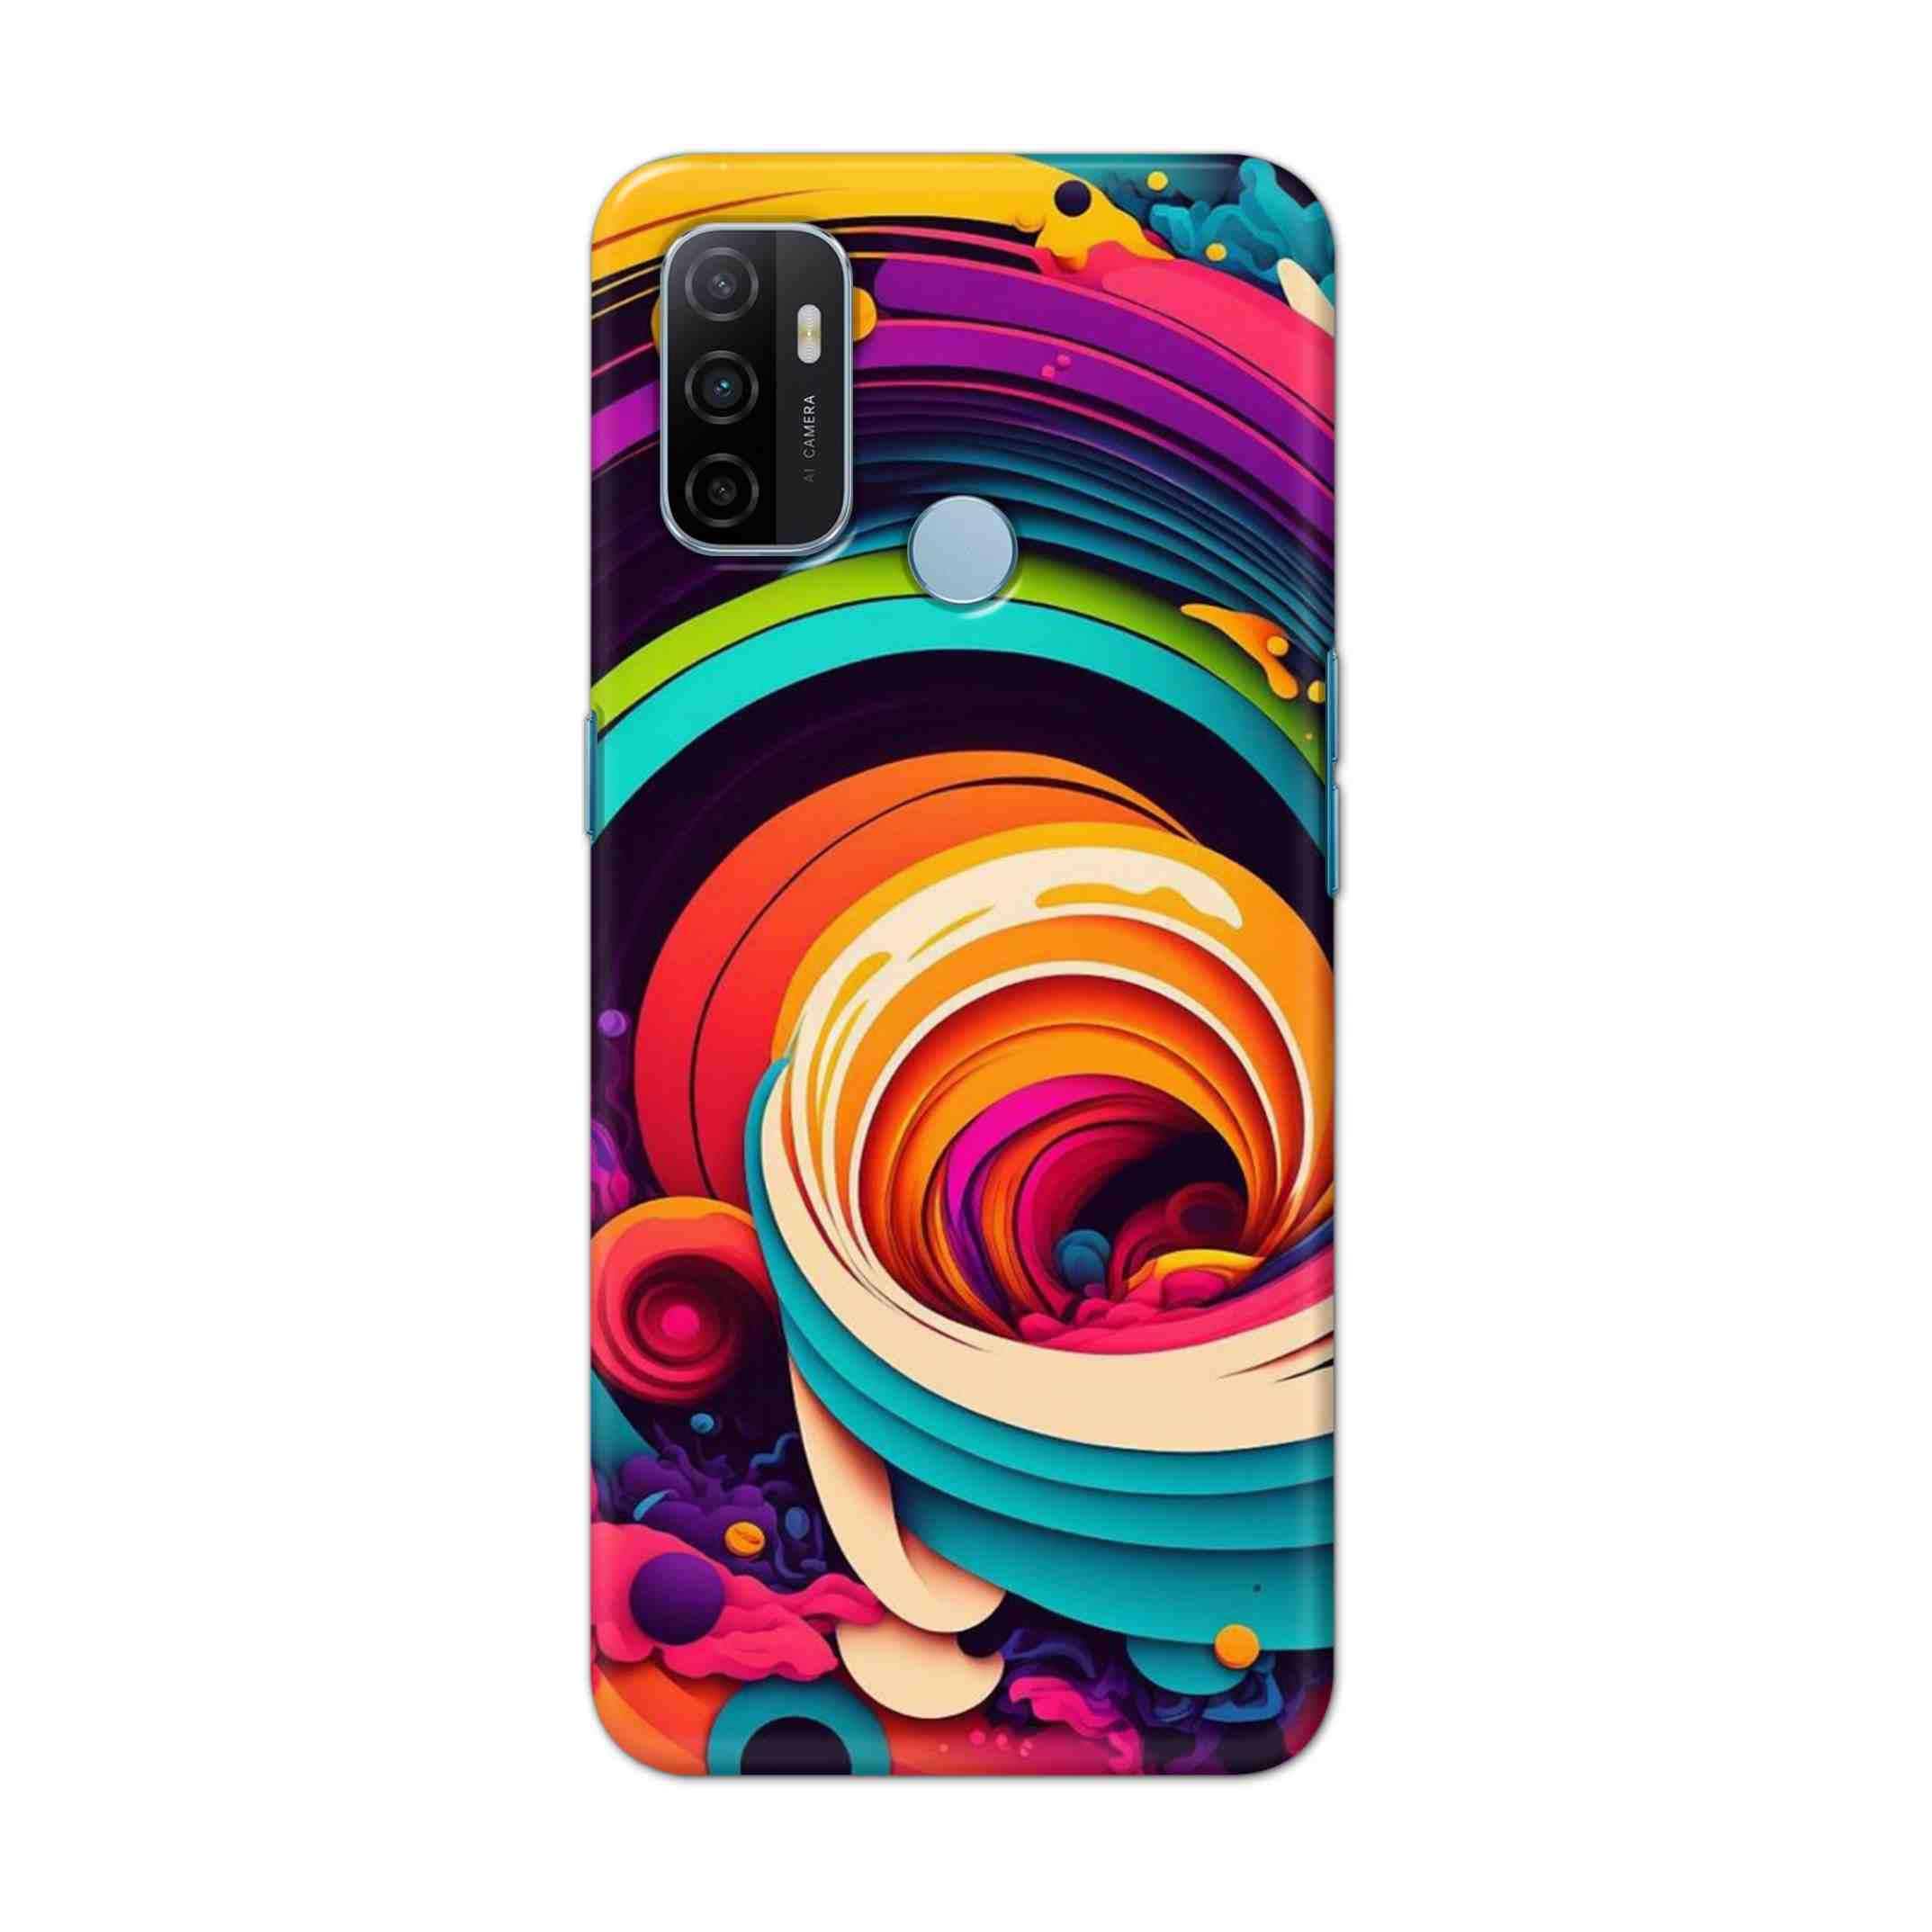 Buy Colour Circle Hard Back Mobile Phone Case Cover For OPPO A53 (2020) Online